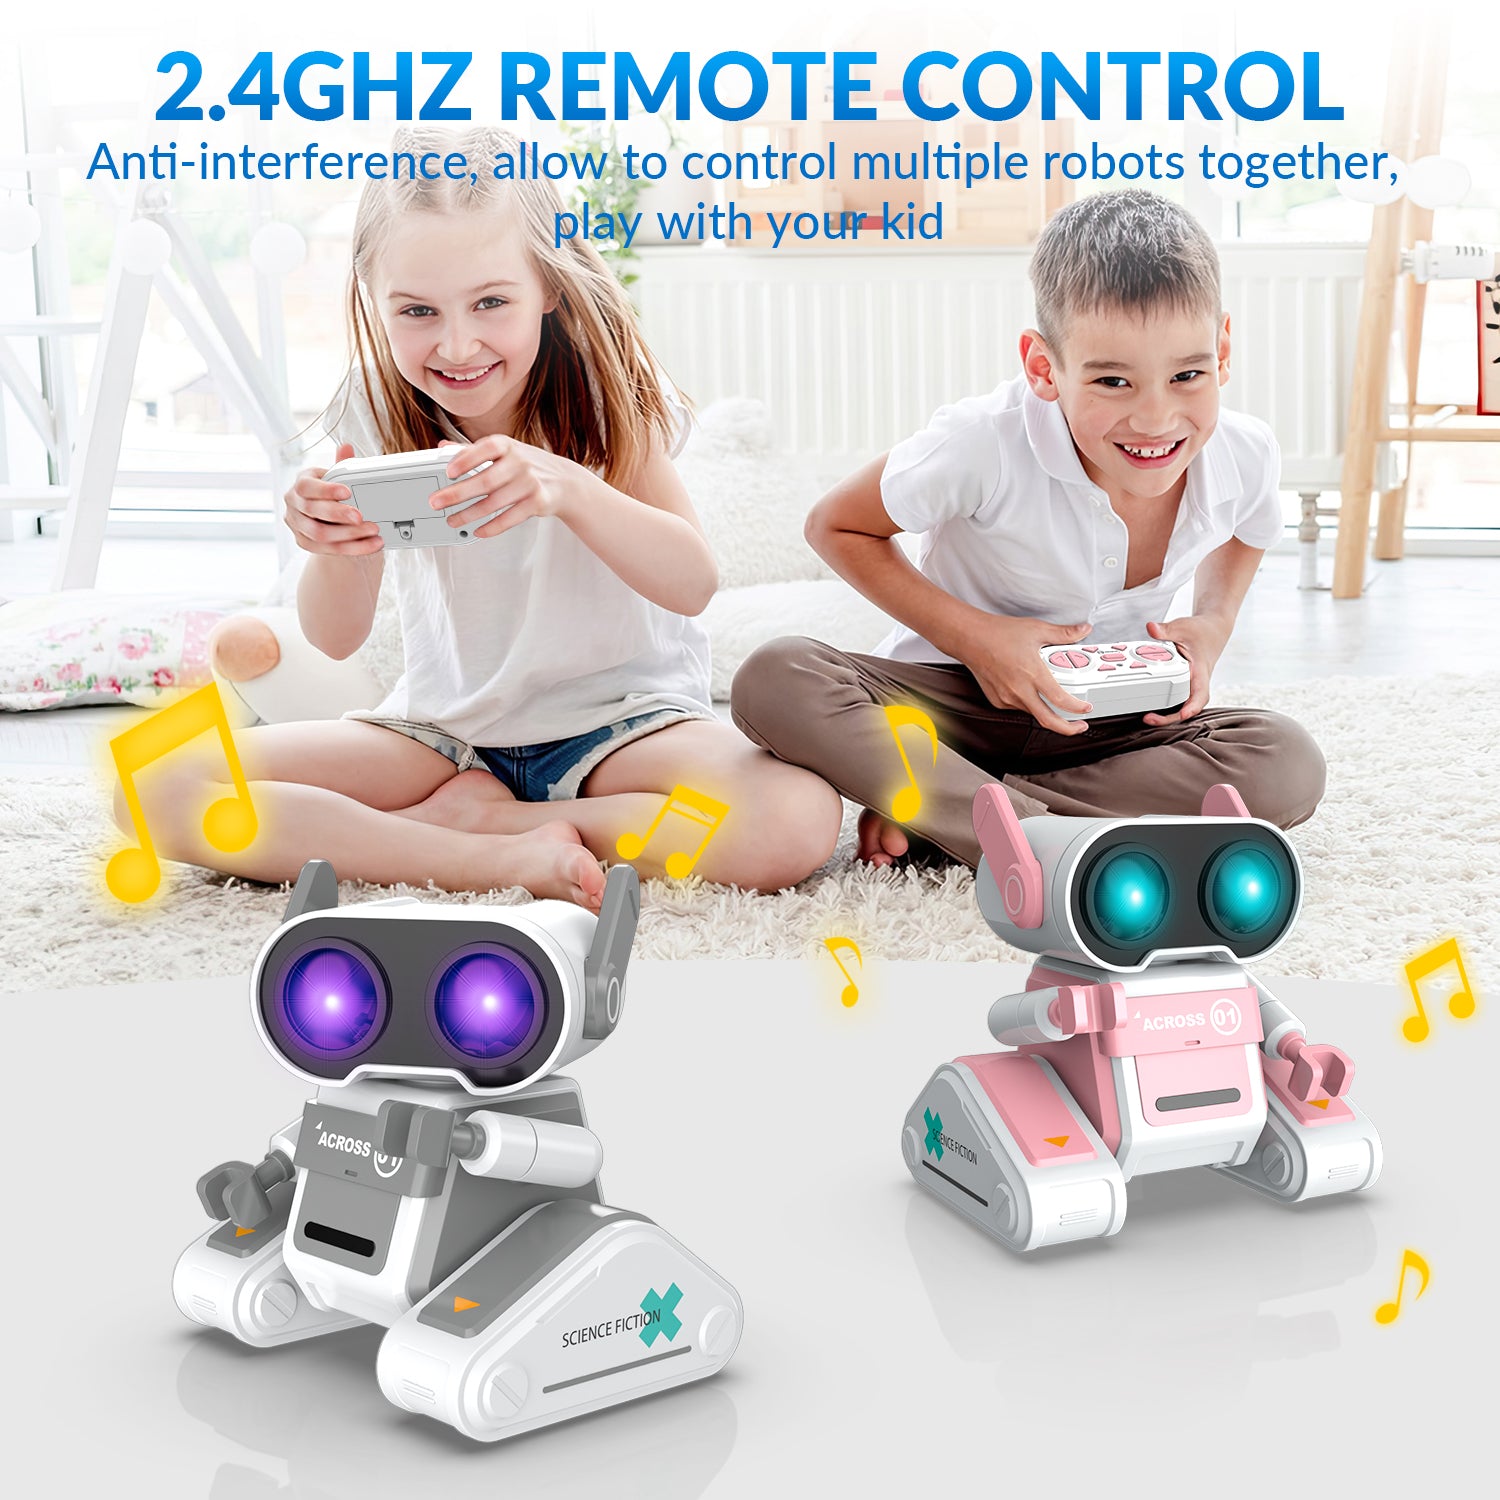 STEMTRON Rechargeable RC Robot Toys with Auto Demo, Dance Moves, Music for Kids (Grey)